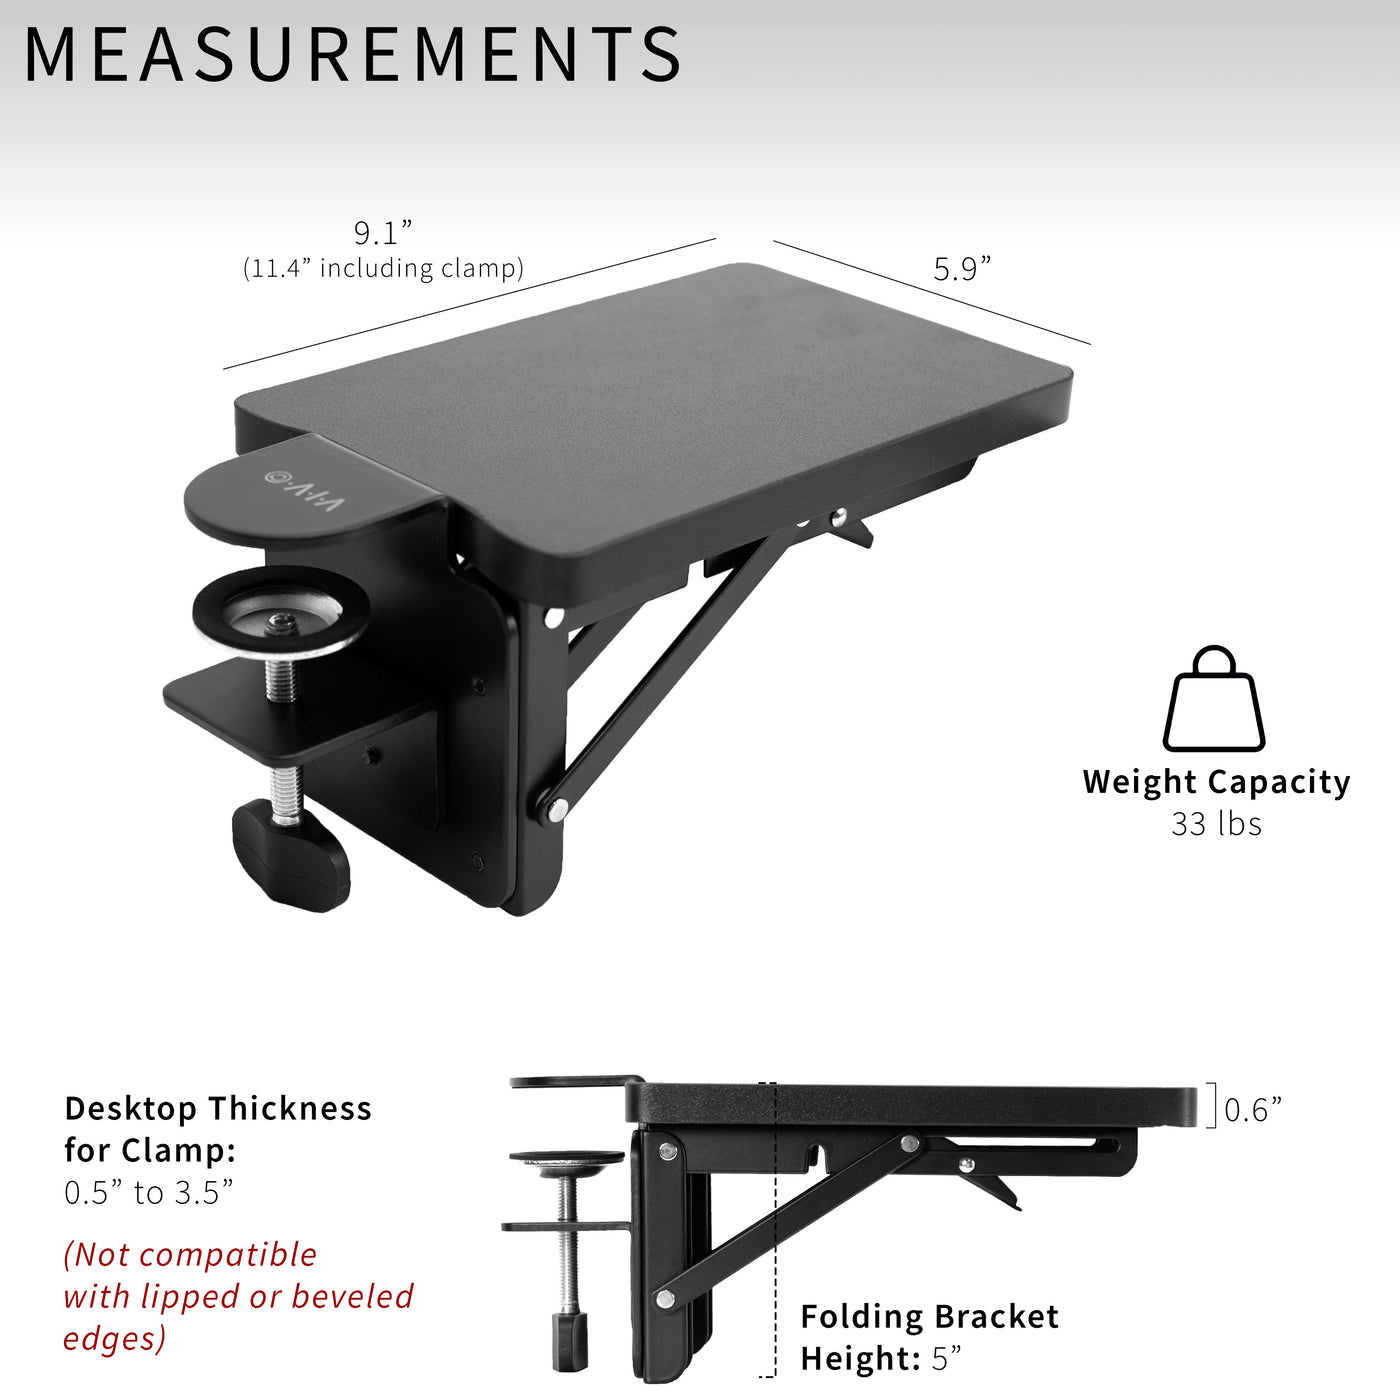 Clamp-on 6 x 9 inch (11 Including Clamps) Desk Extender, Wrist Support, Armrest Tray, Table Mount for Sit Stand Desks